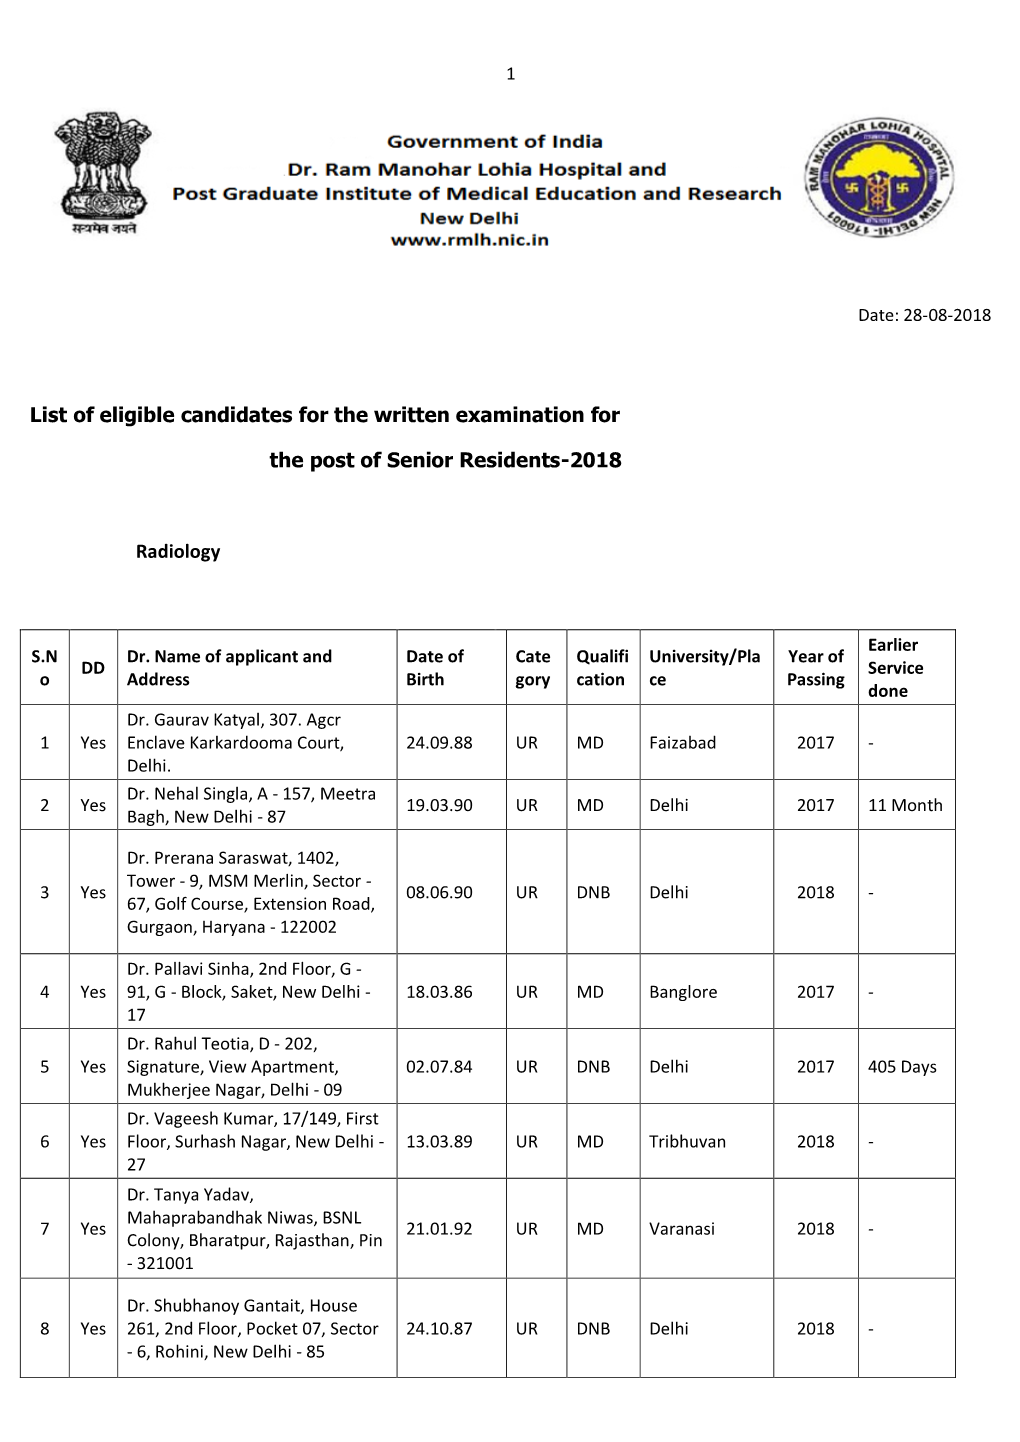 List of Eligible Candidates for the Written Examination for the Post Of